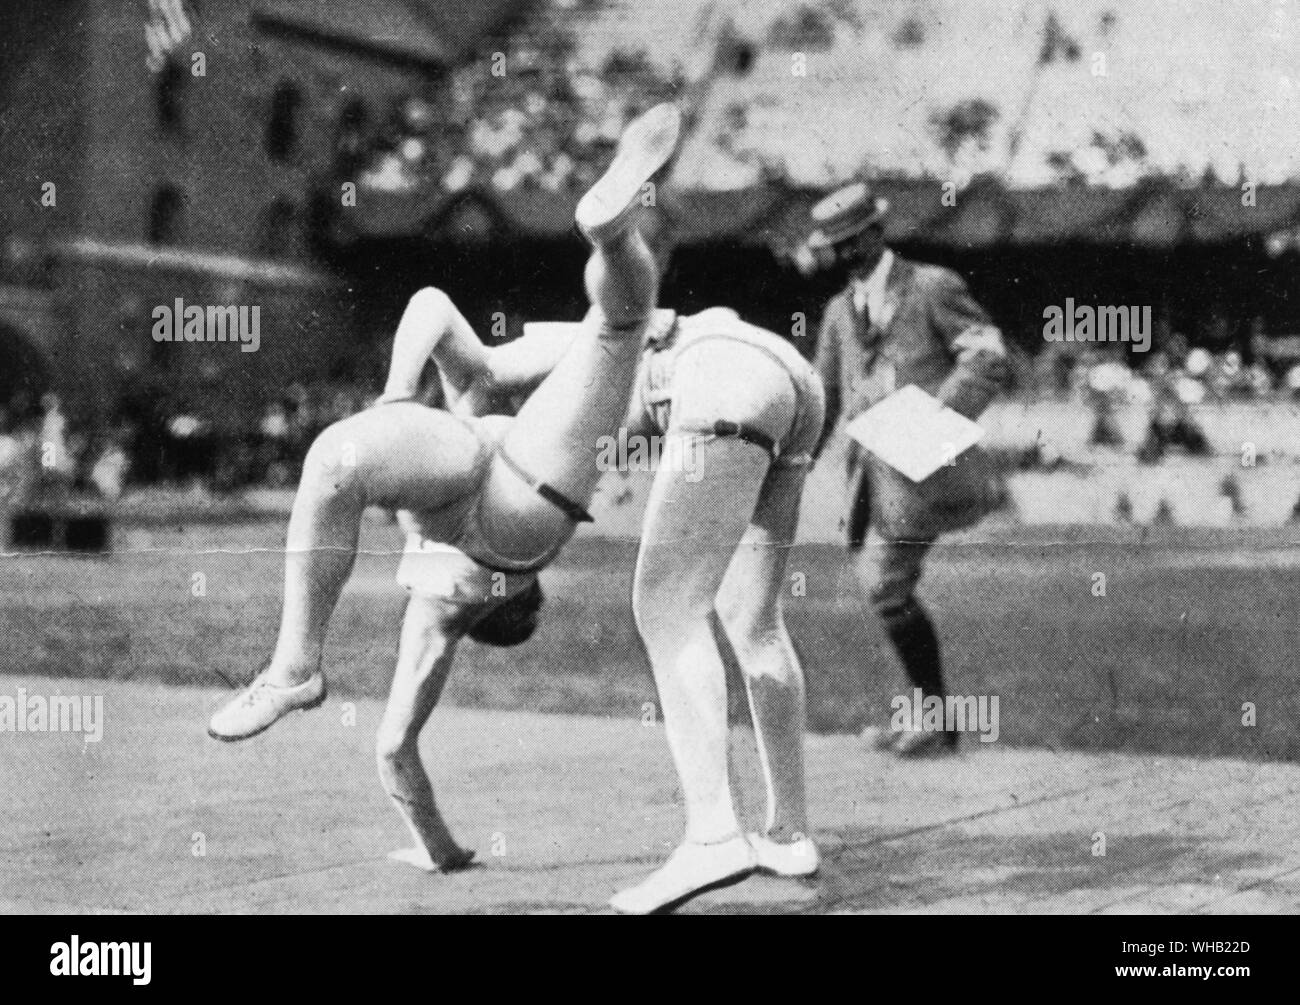 Stockholm 1912 Olympic Games. A demonstration of glima wrestling. Glima wrestling is still practiced in Scandinavia today and it is believed that it is almost unchanged from the Viking era. The Olympic Games page 75. Stock Photo